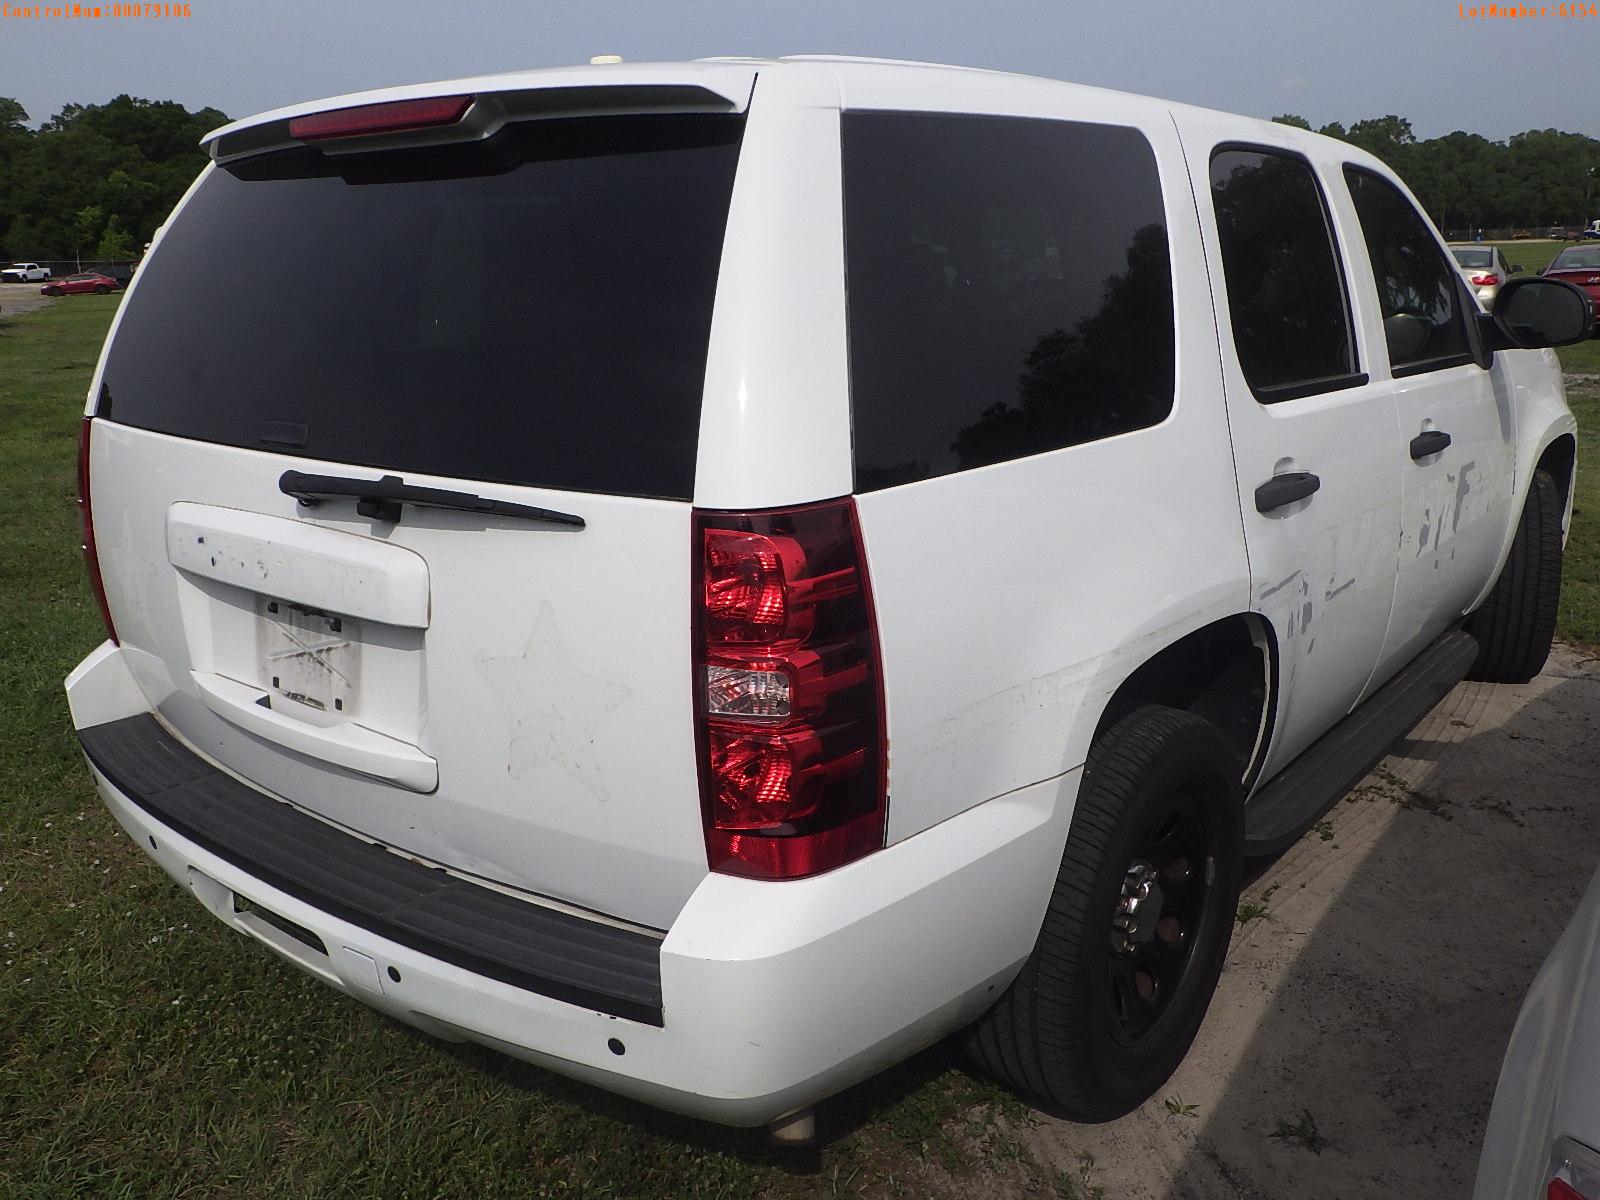 4-06154 (Cars-SUV 4D)  Seller: Gov-Pinellas County Sheriffs Ofc 2012 CHEV TAHOE